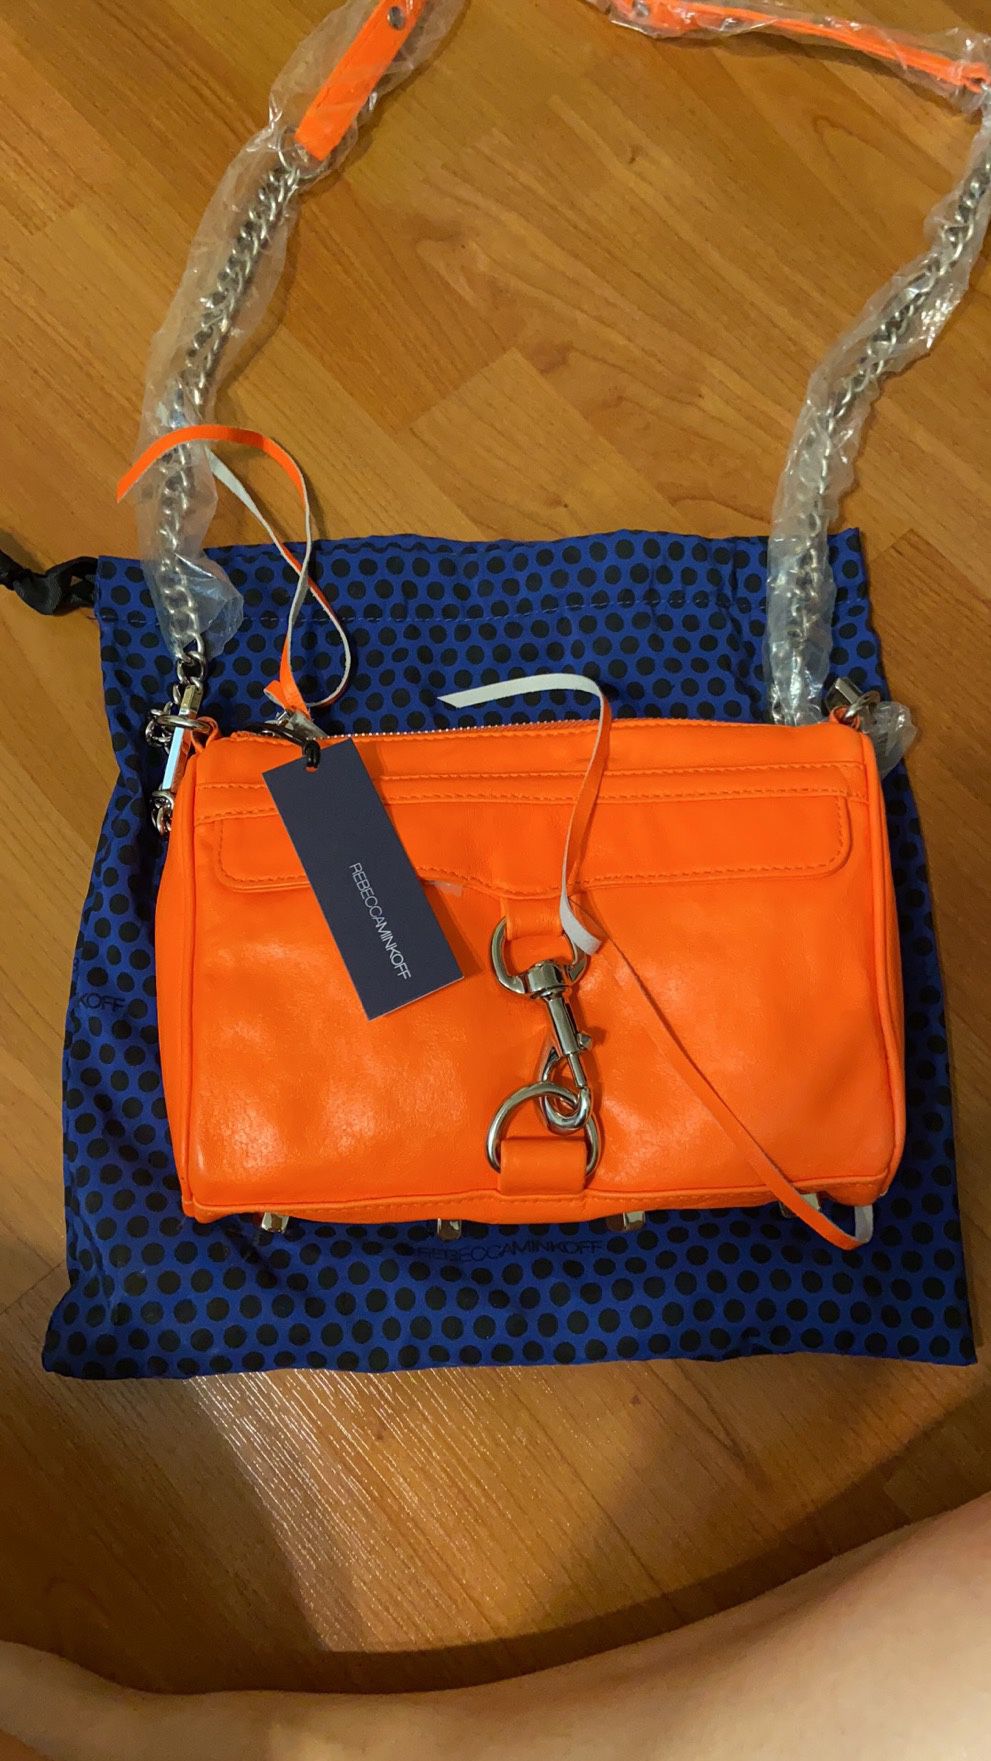 Rebecca Minkoff - Brand New with tags